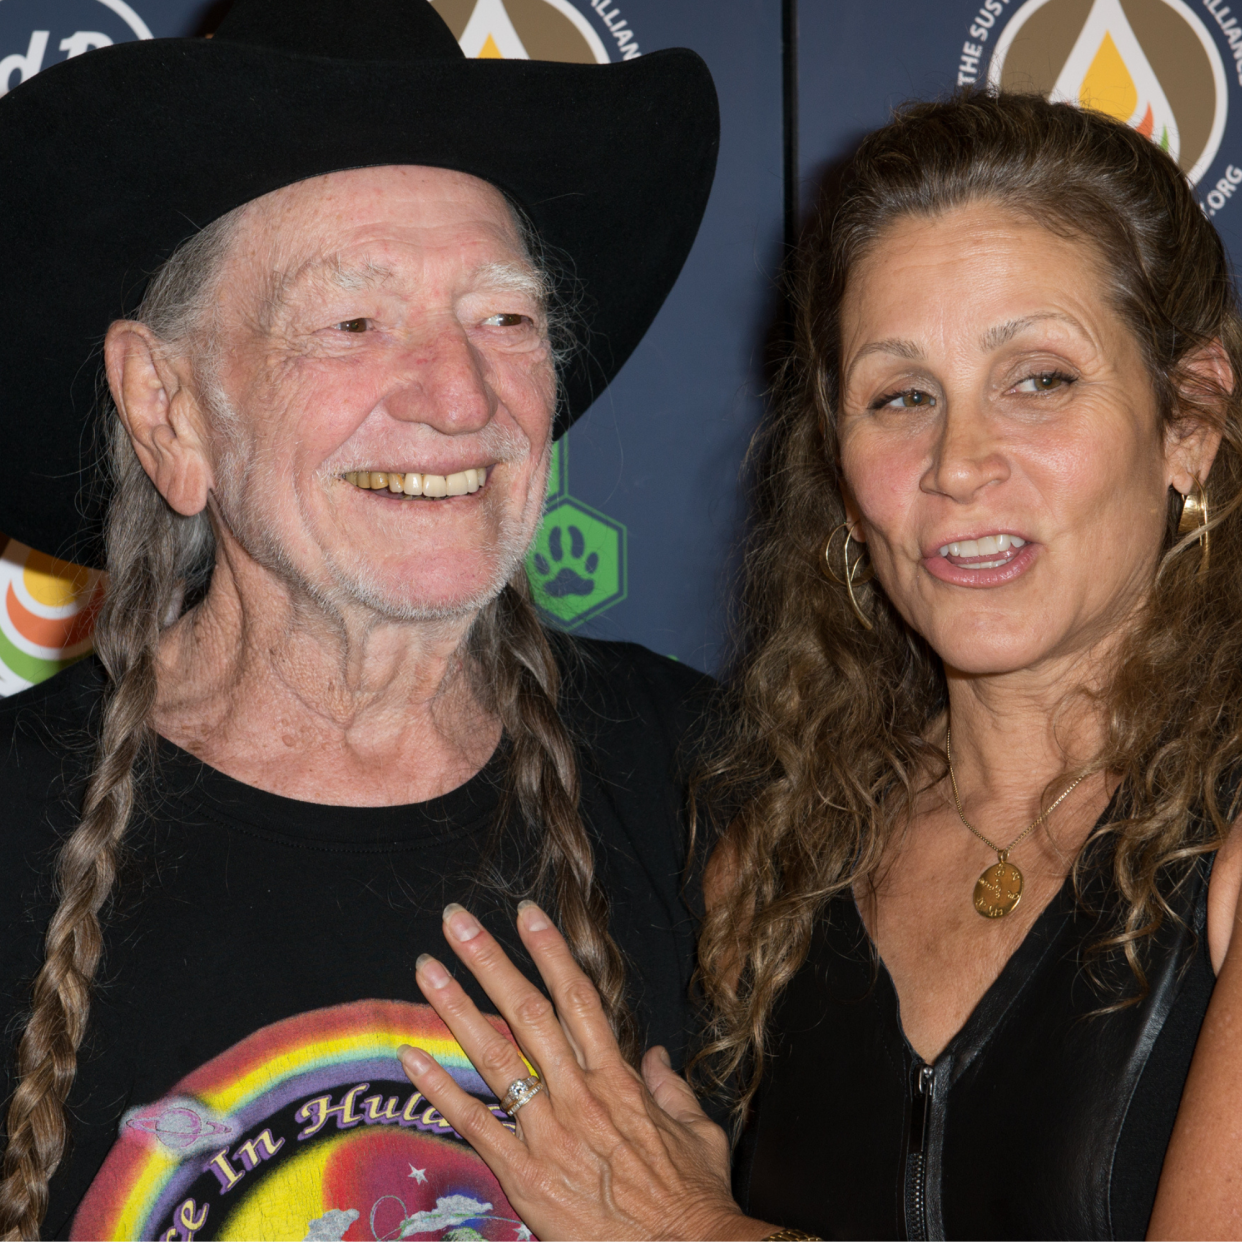  Willie Nelson and Annie D'Angelo attend Hard Rock International's Wille Nelson Artist Spotlight Benefit Concer at Hard Rock Cafe, Times Square on June 6, 2013 in New York City. 